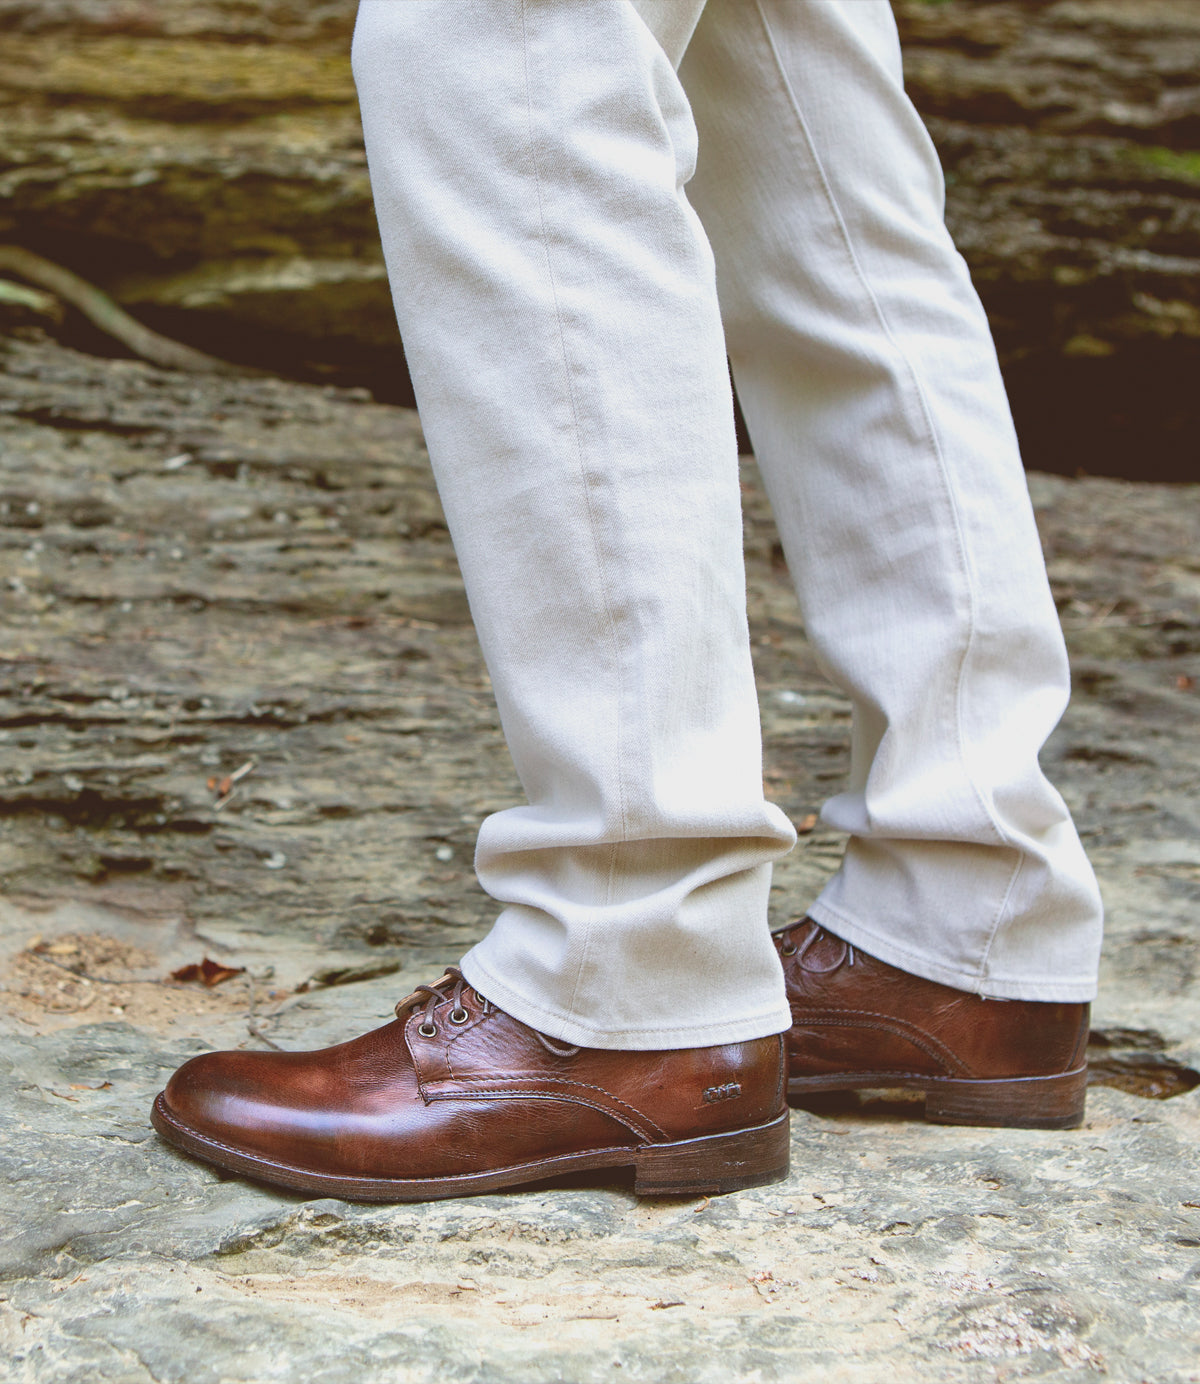 A person wearing men's Bed Stu Bradley Black Rustic boots and white pants standing on a rocky surface.